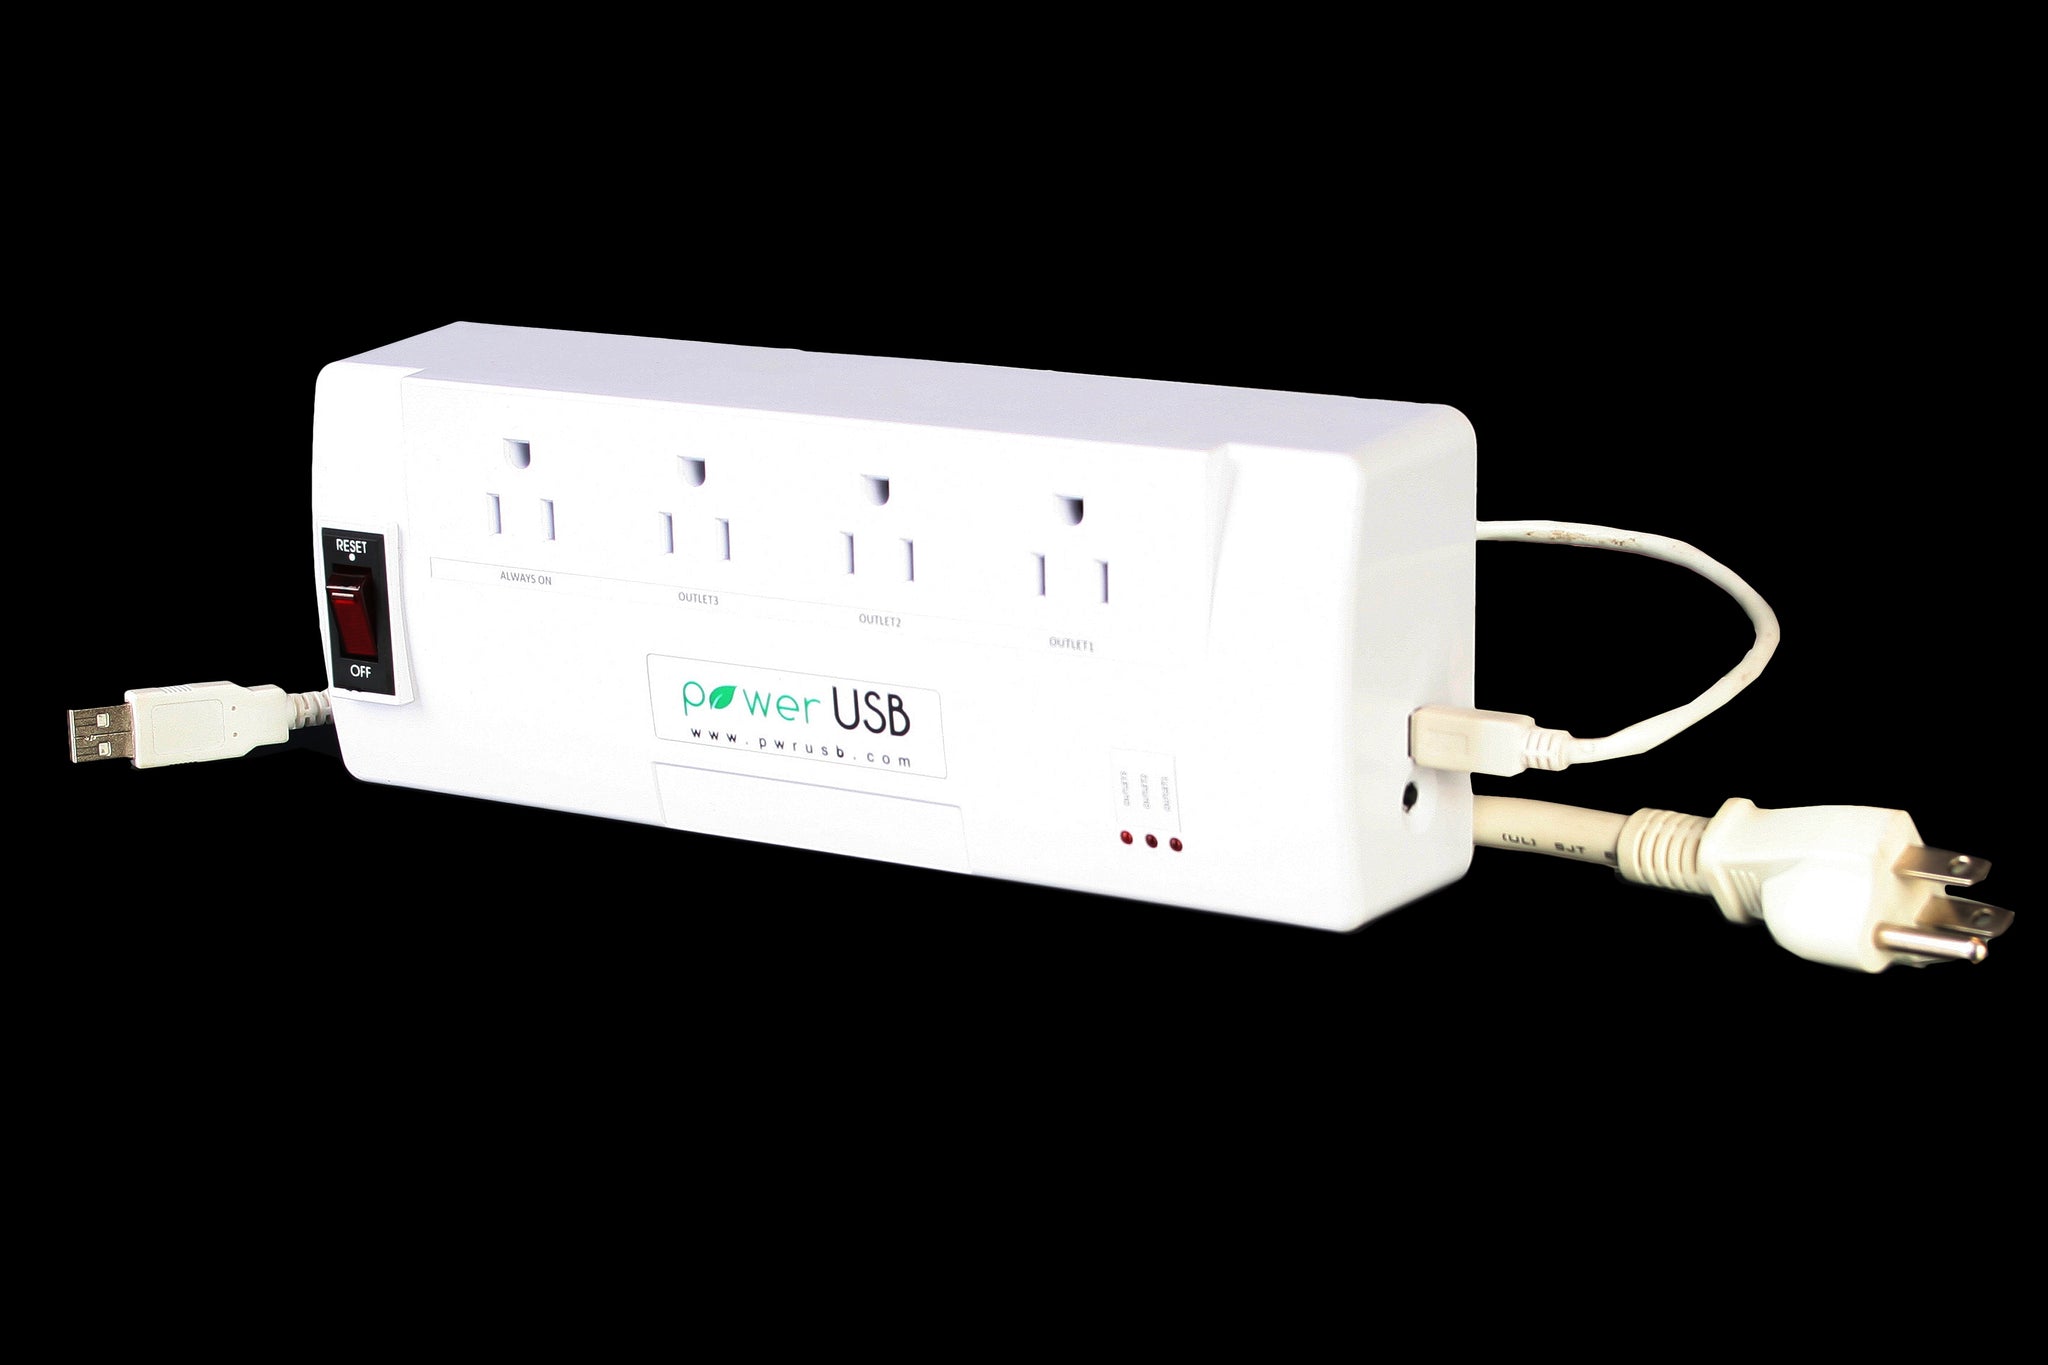 Crack pot fort Sandet Power USB, USB Controlled Power Strip, Power automation, automatically  switch on outlets, Software power control, Timed switch on/off, Universal  World socket, Control lights and Appliances from PC, Commercial Automation,  Industrial Automation, PLC,